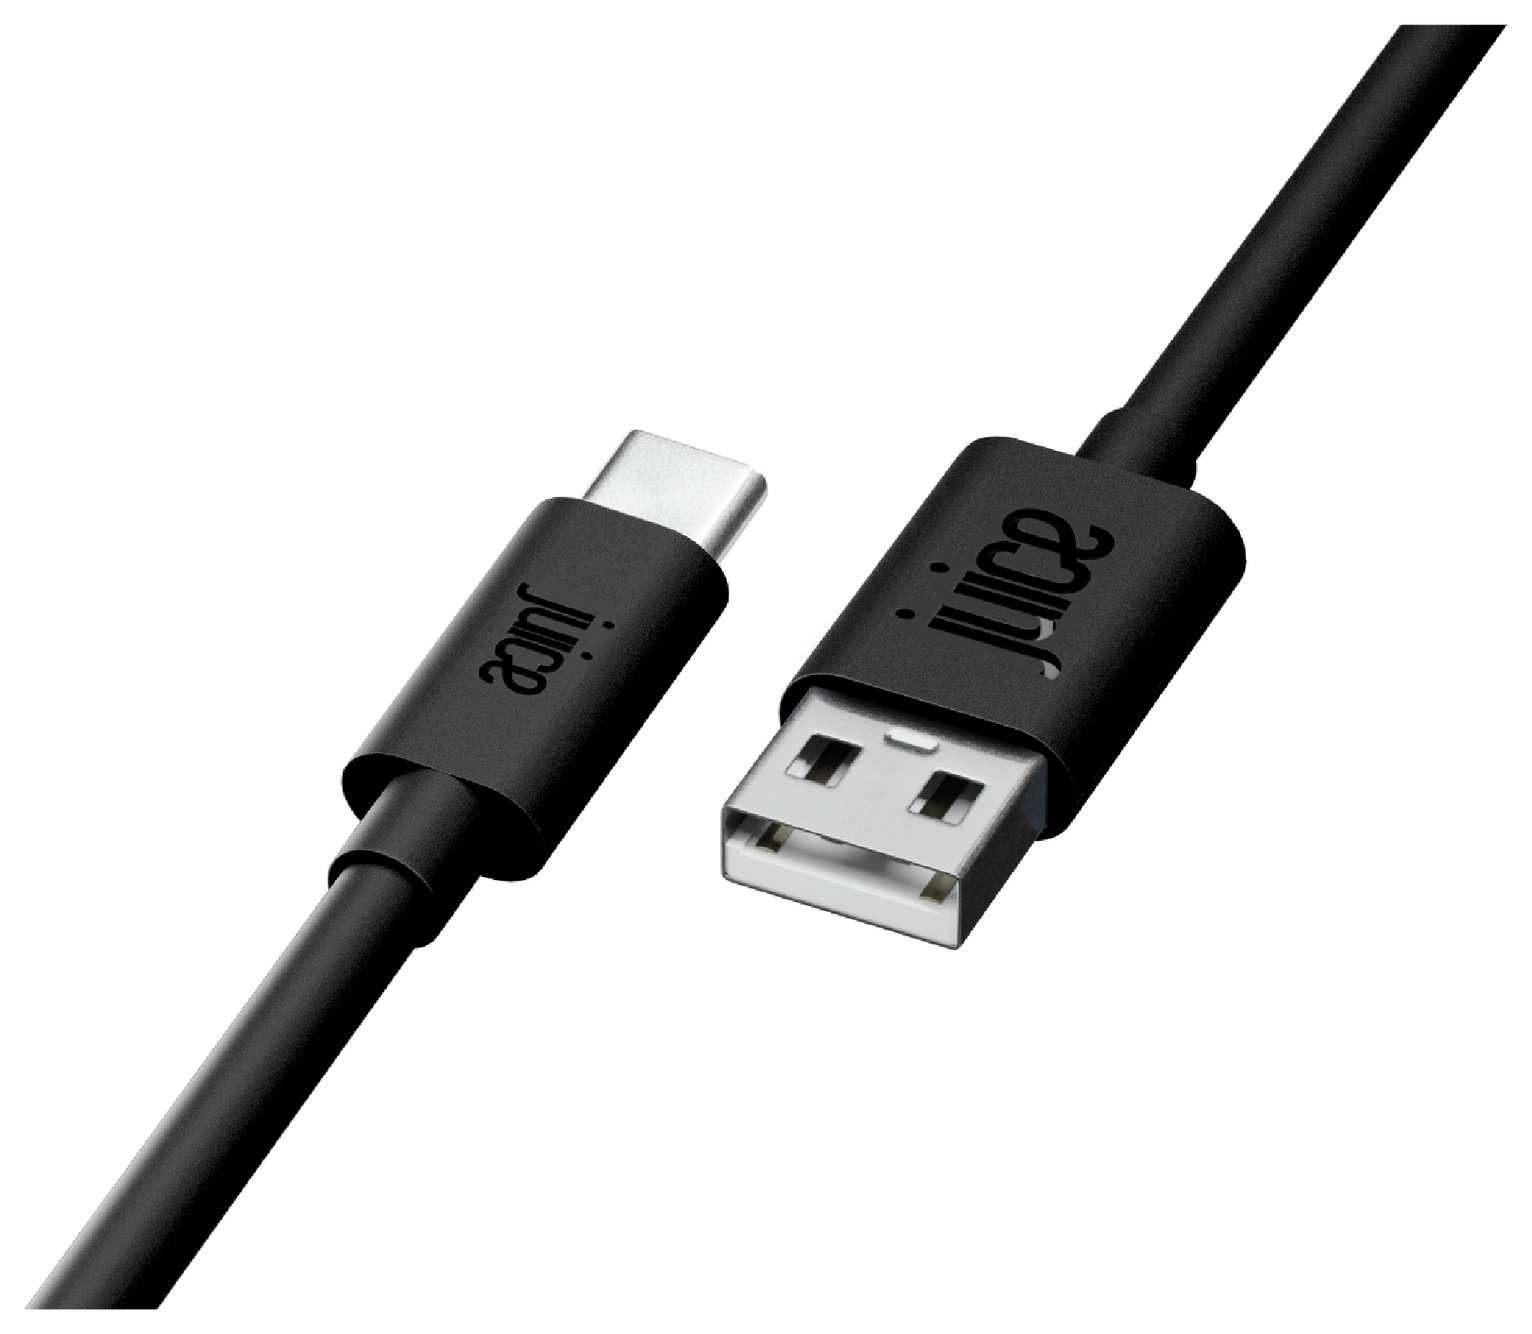 Juice USB to Type C 2m Charging Cable review